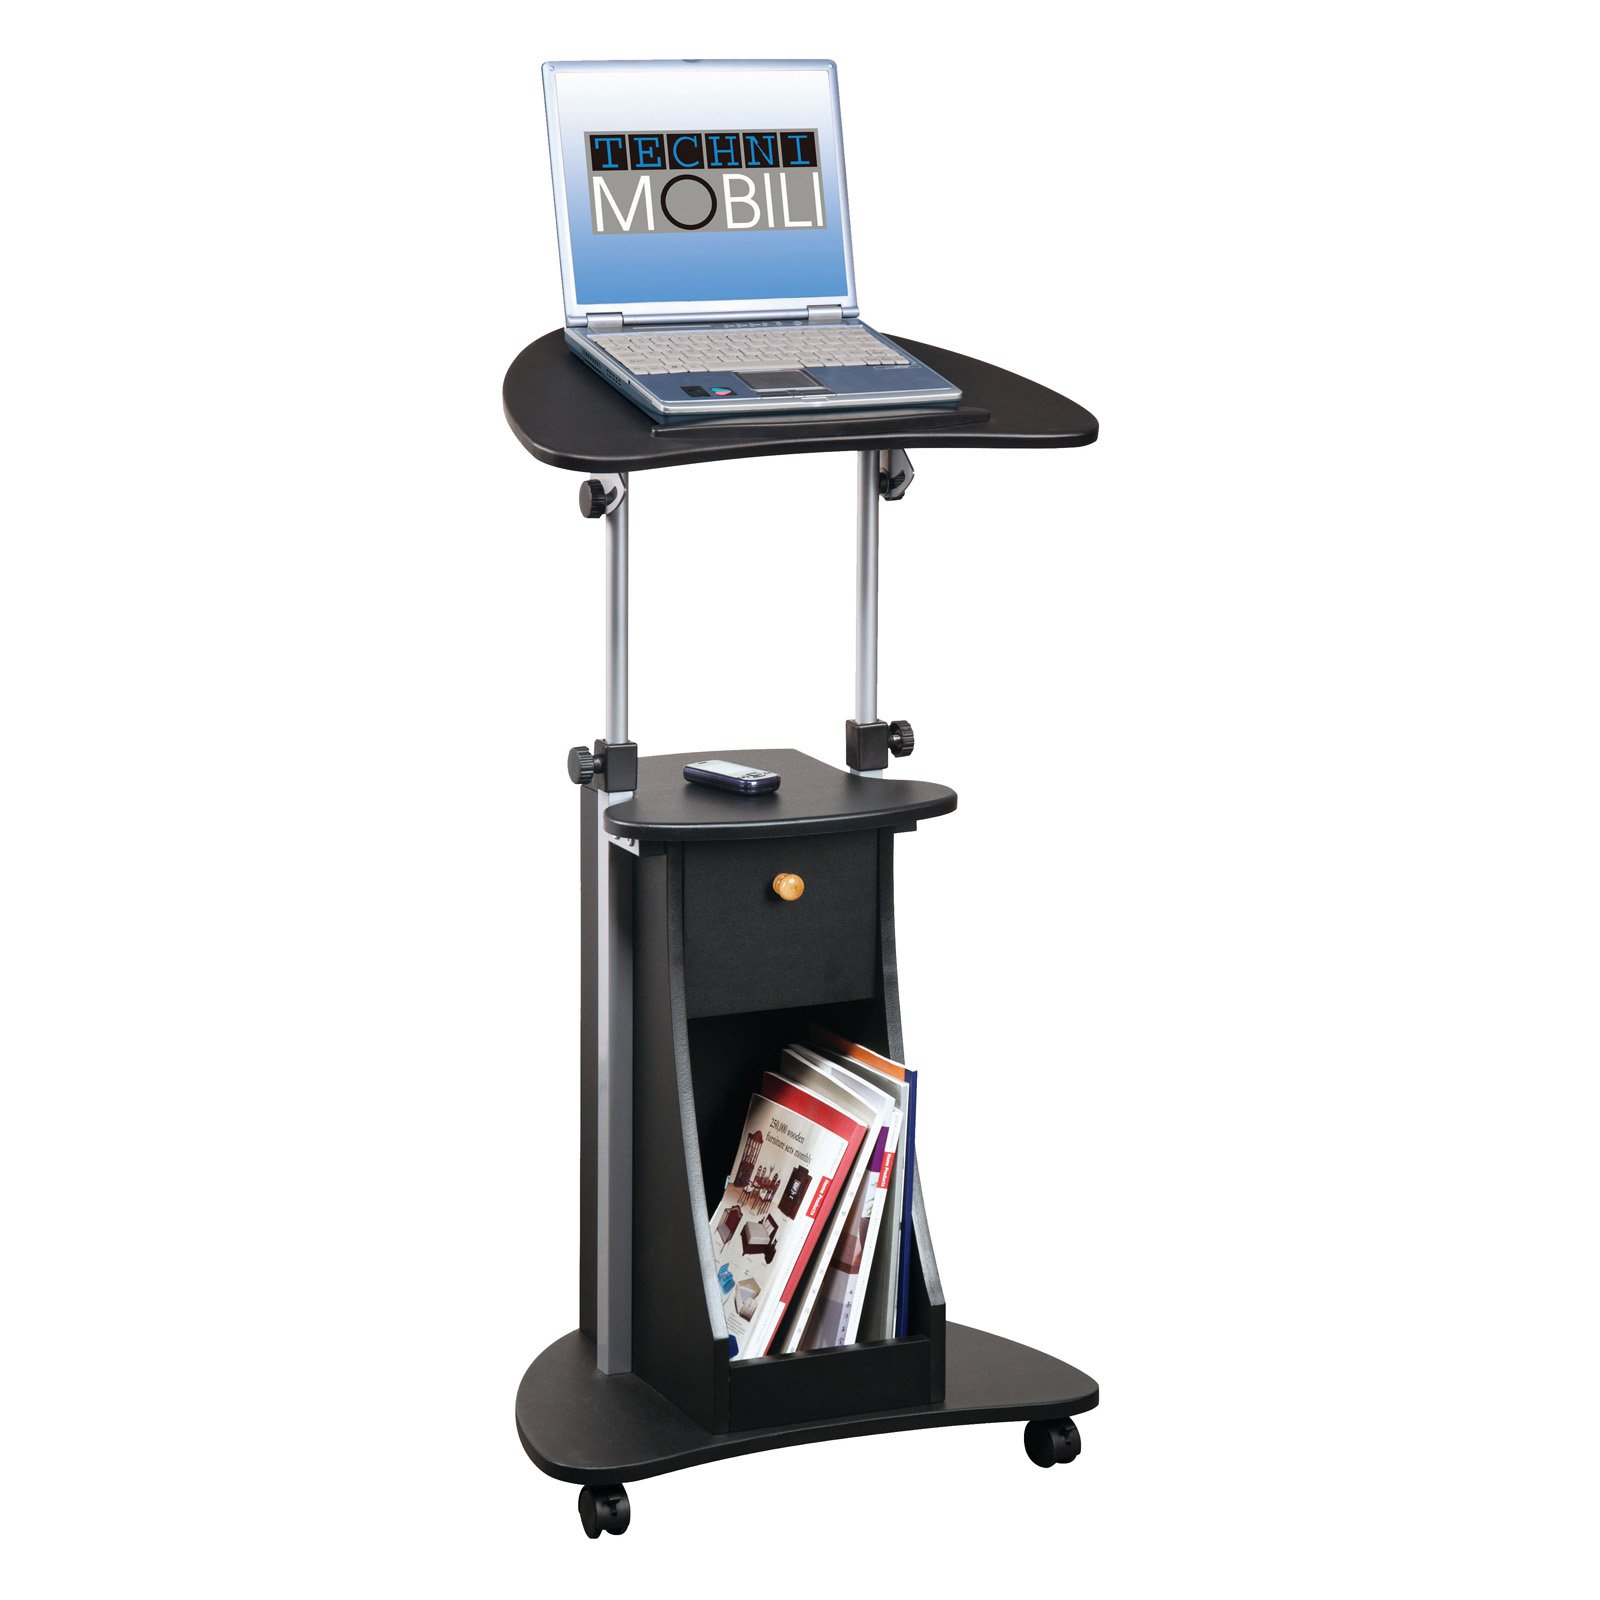 Techni Mobili Deluxe Height Adjustable Laptop Cart in Black - image 3 of 10